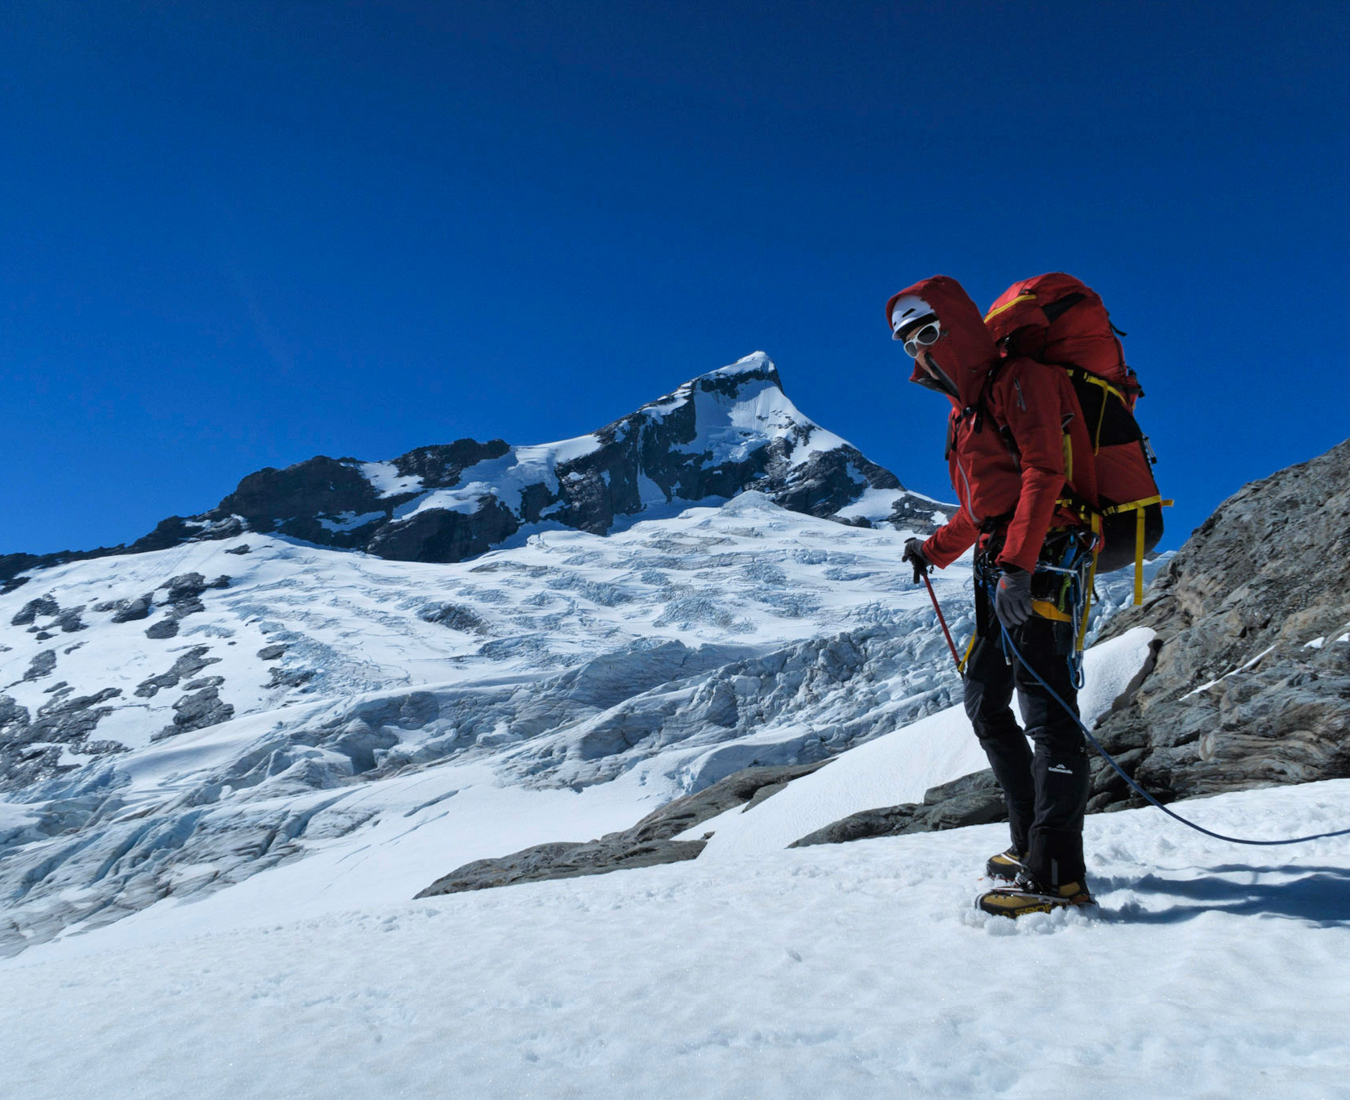 A climber participating in the Aspiring Guided Ascent with the majestic Tititea Mount Aspiring behind.